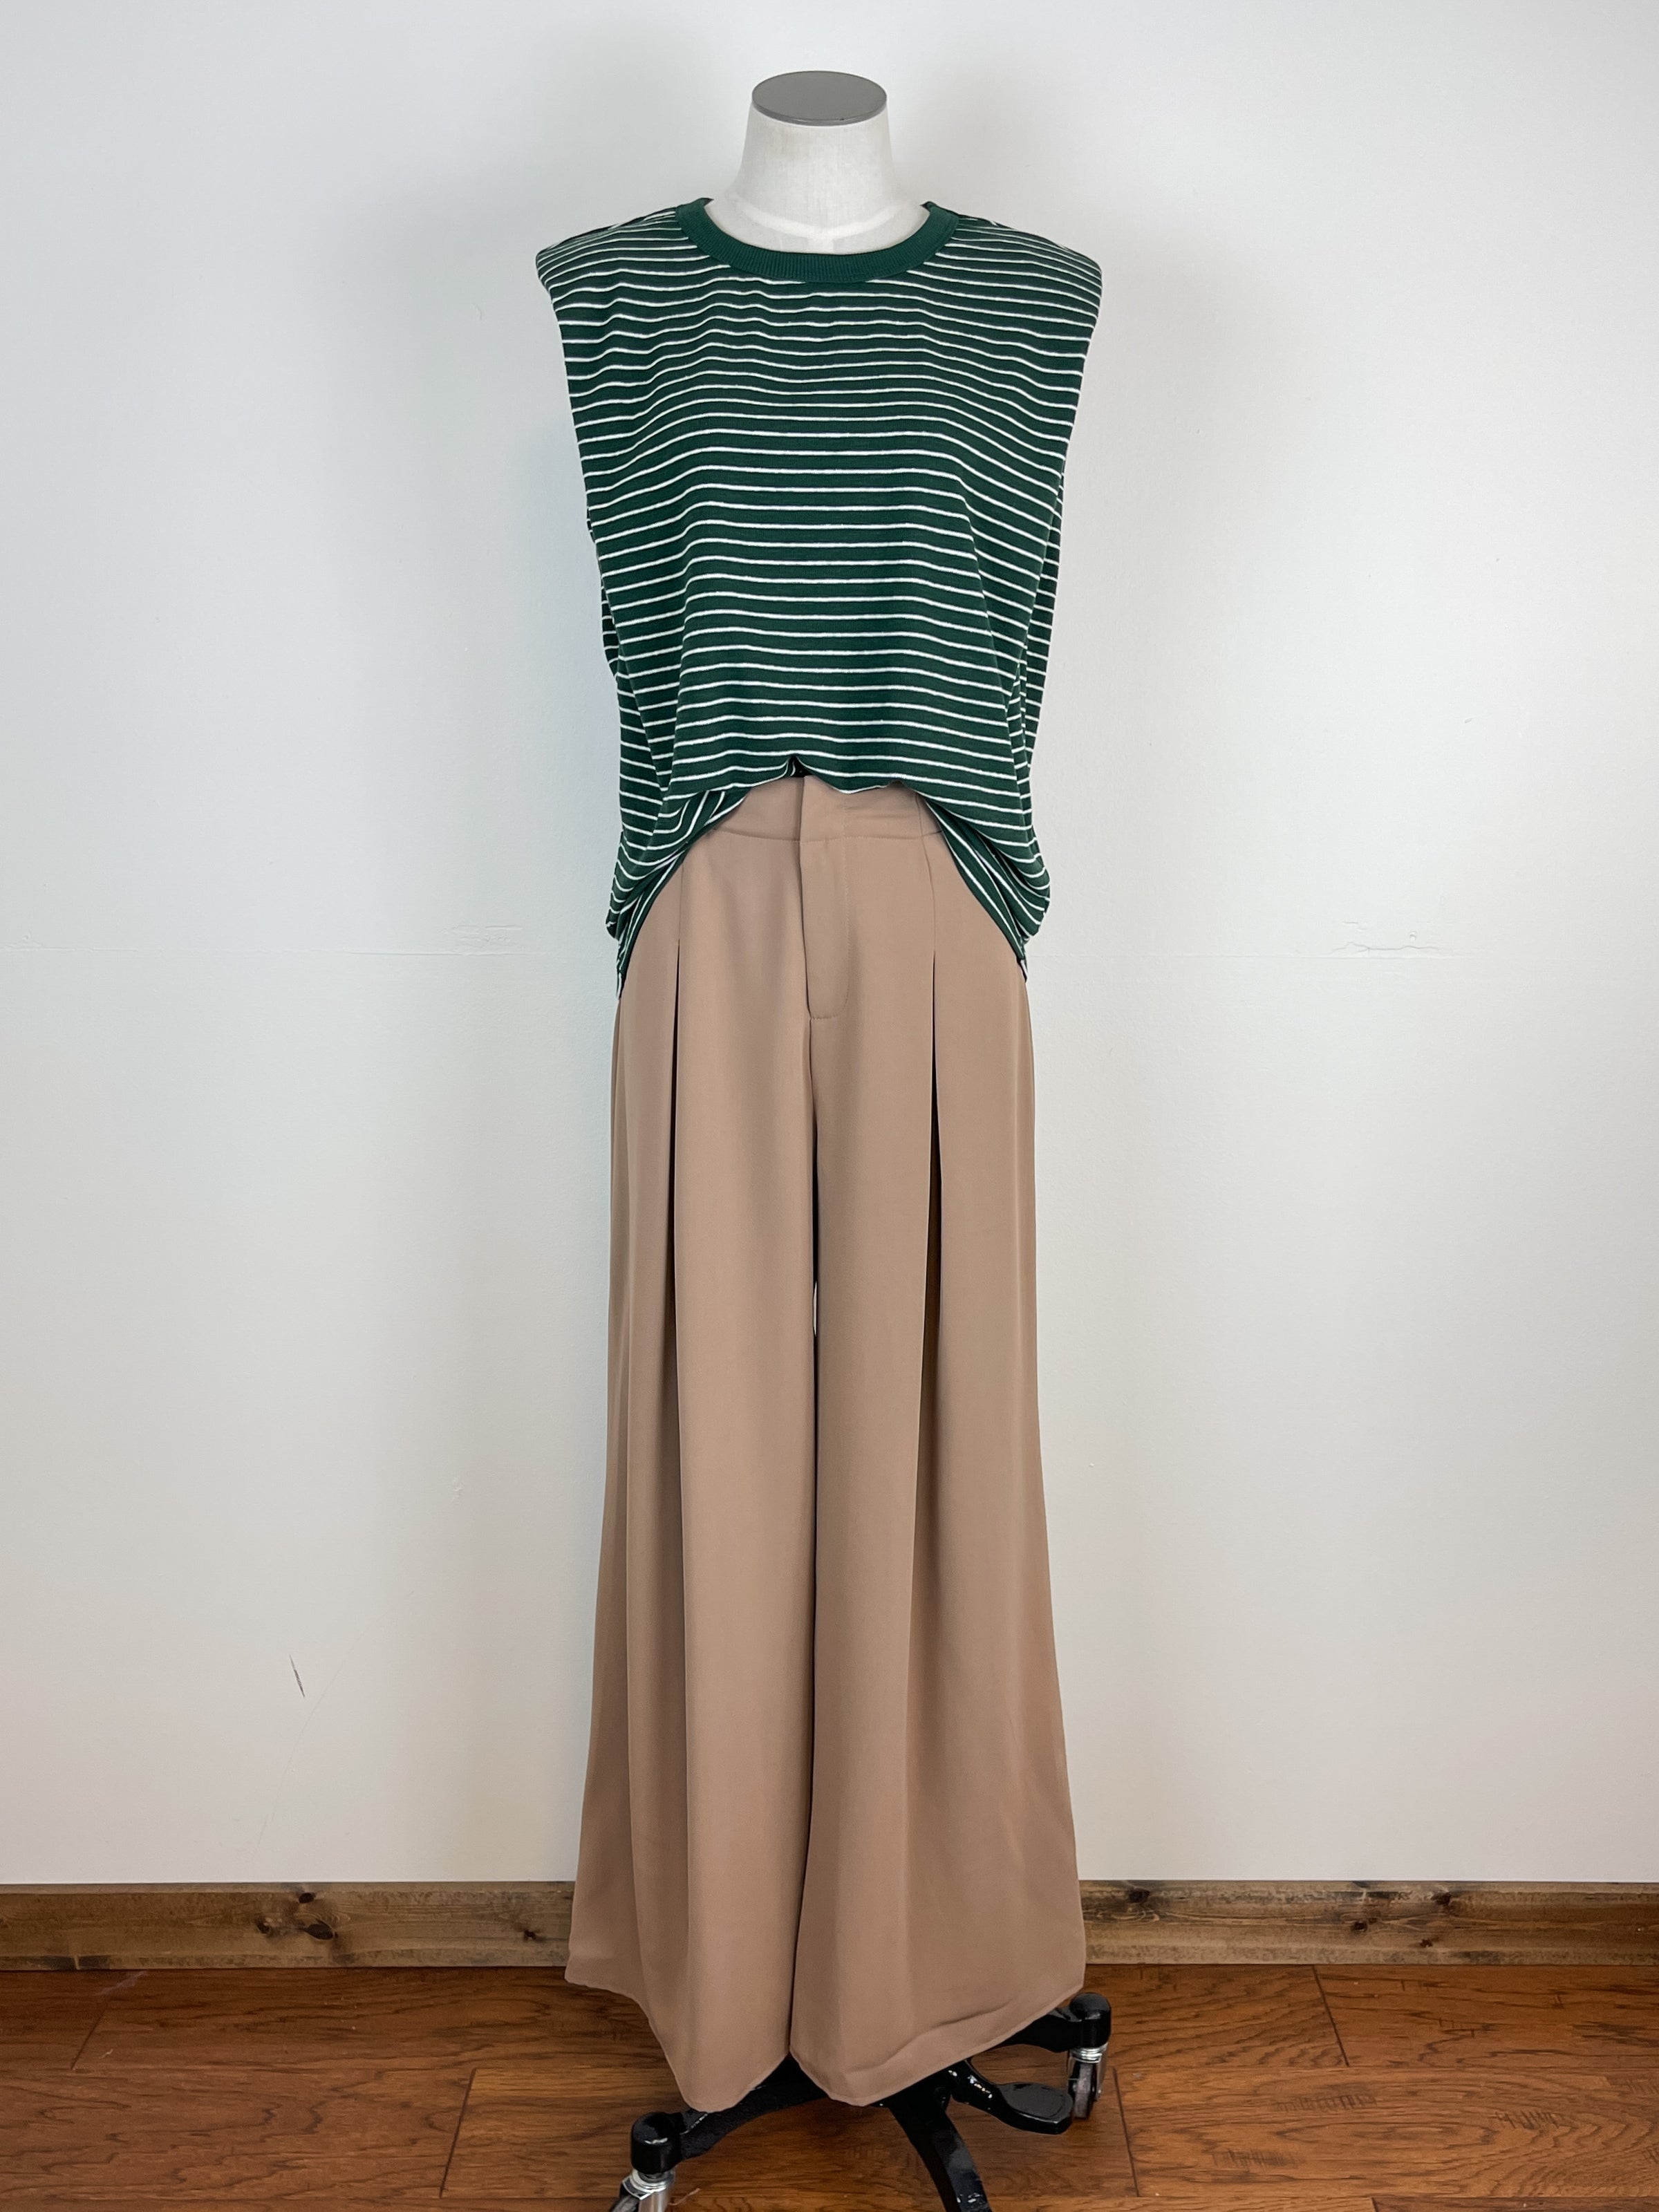 PLEATED WIDE FIT PANTS - Light tan